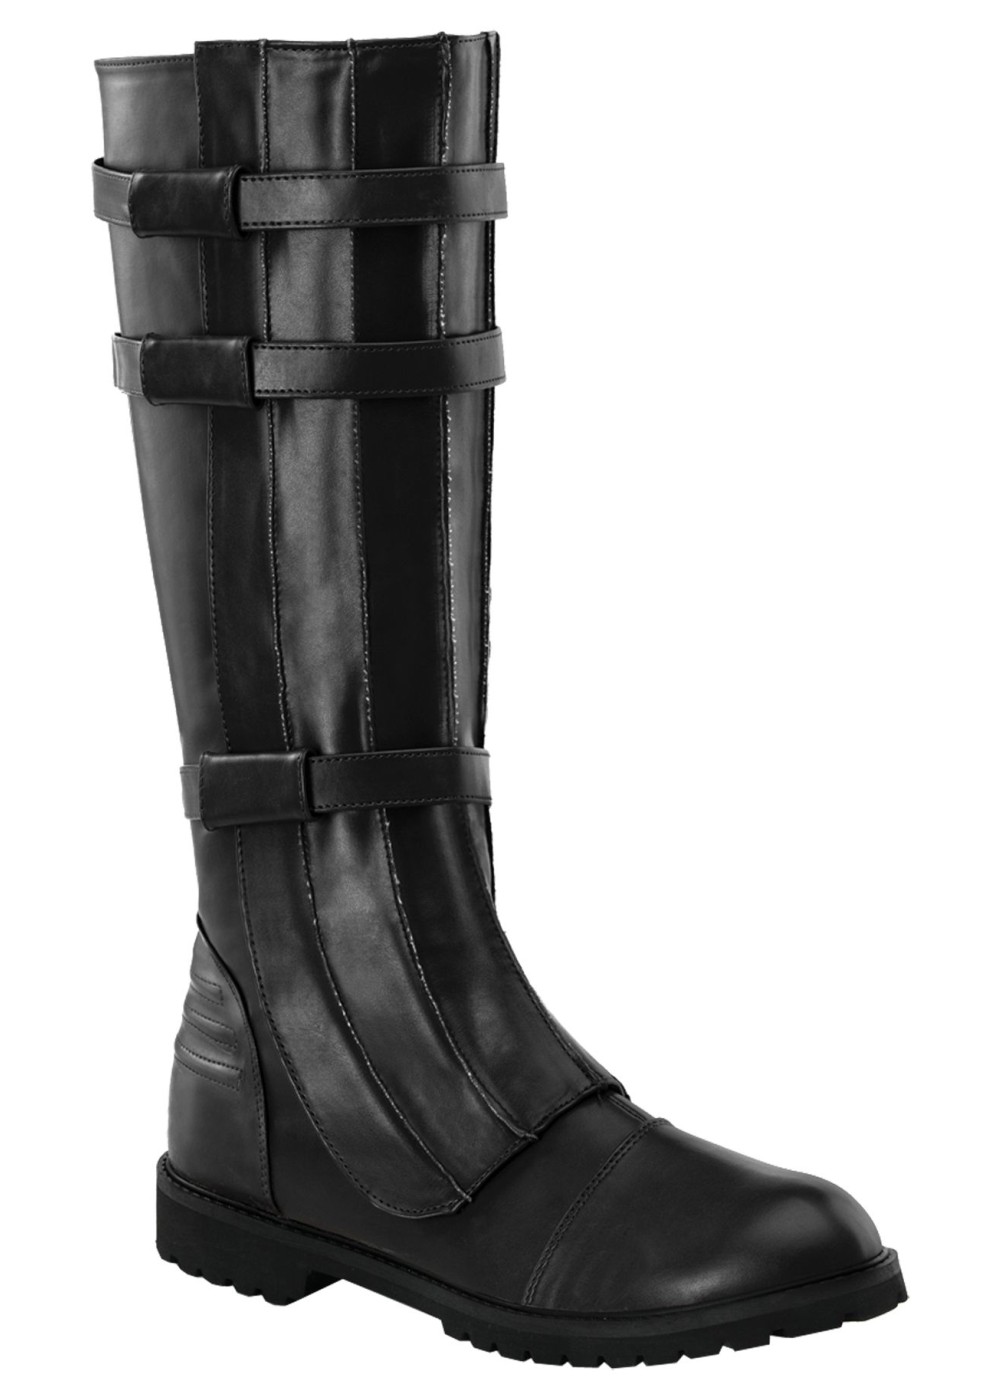 Shiny Black Faux Leather Boots